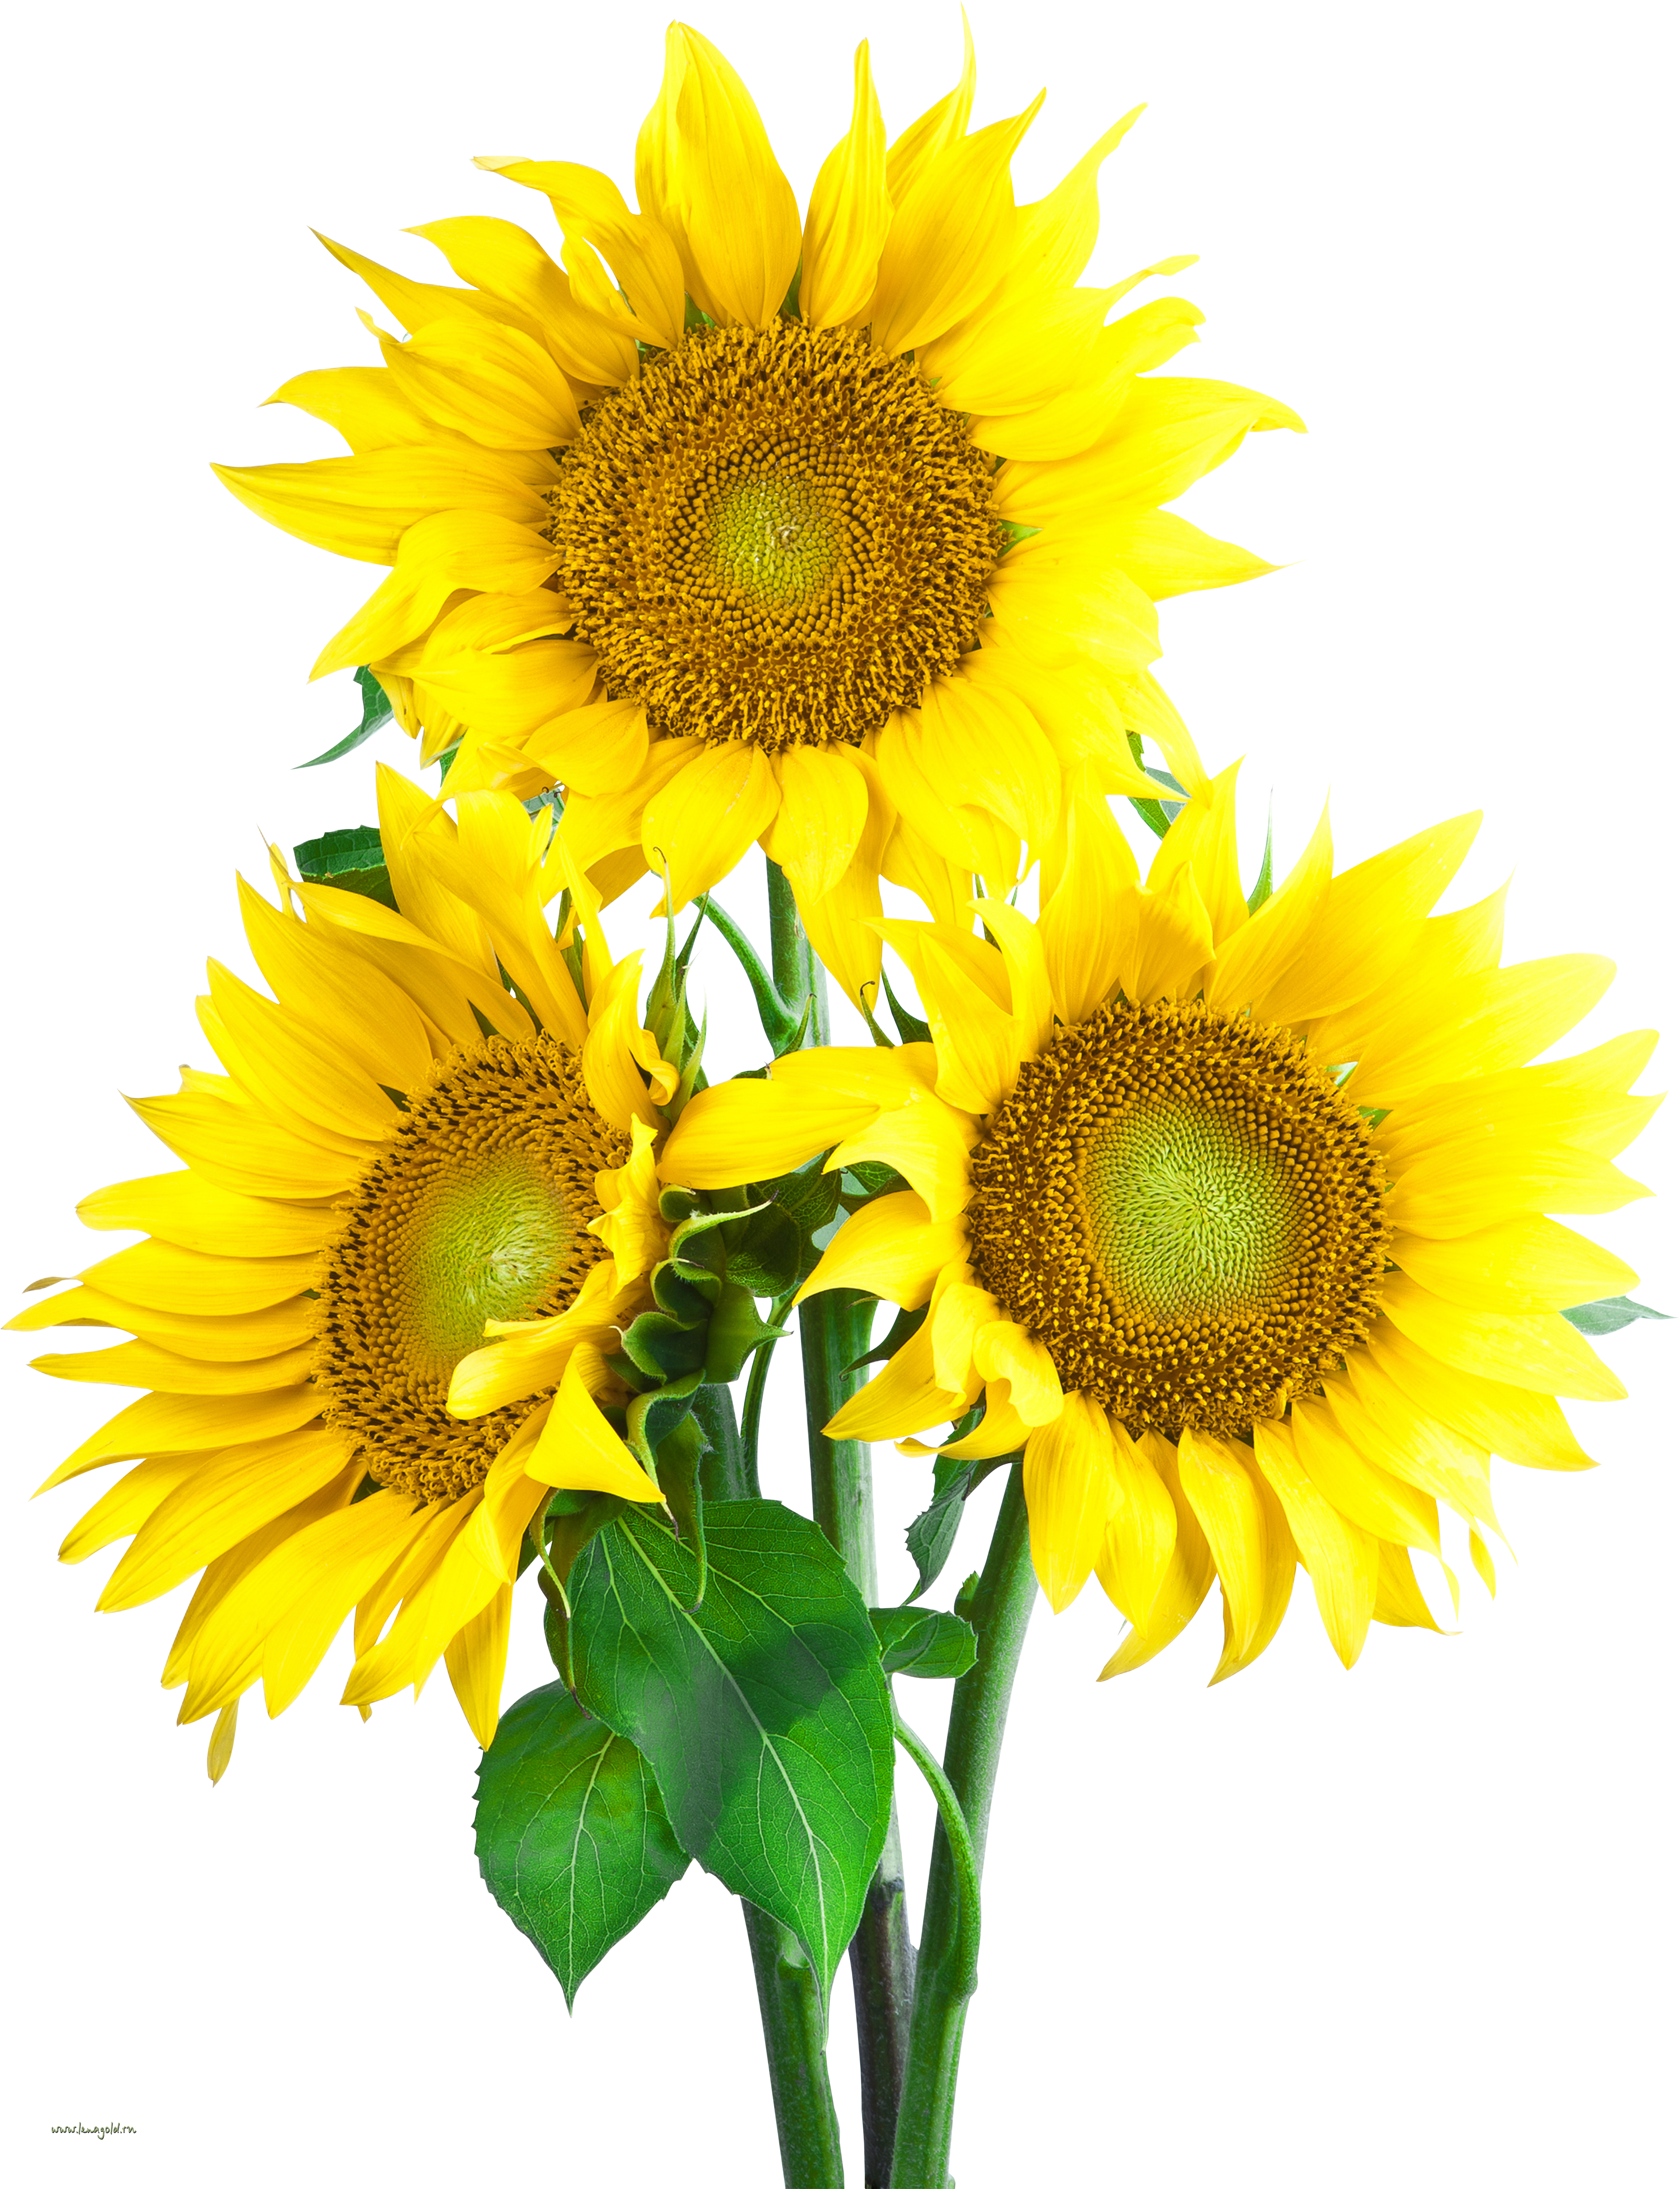 Sunflower images free download. Sun flower png